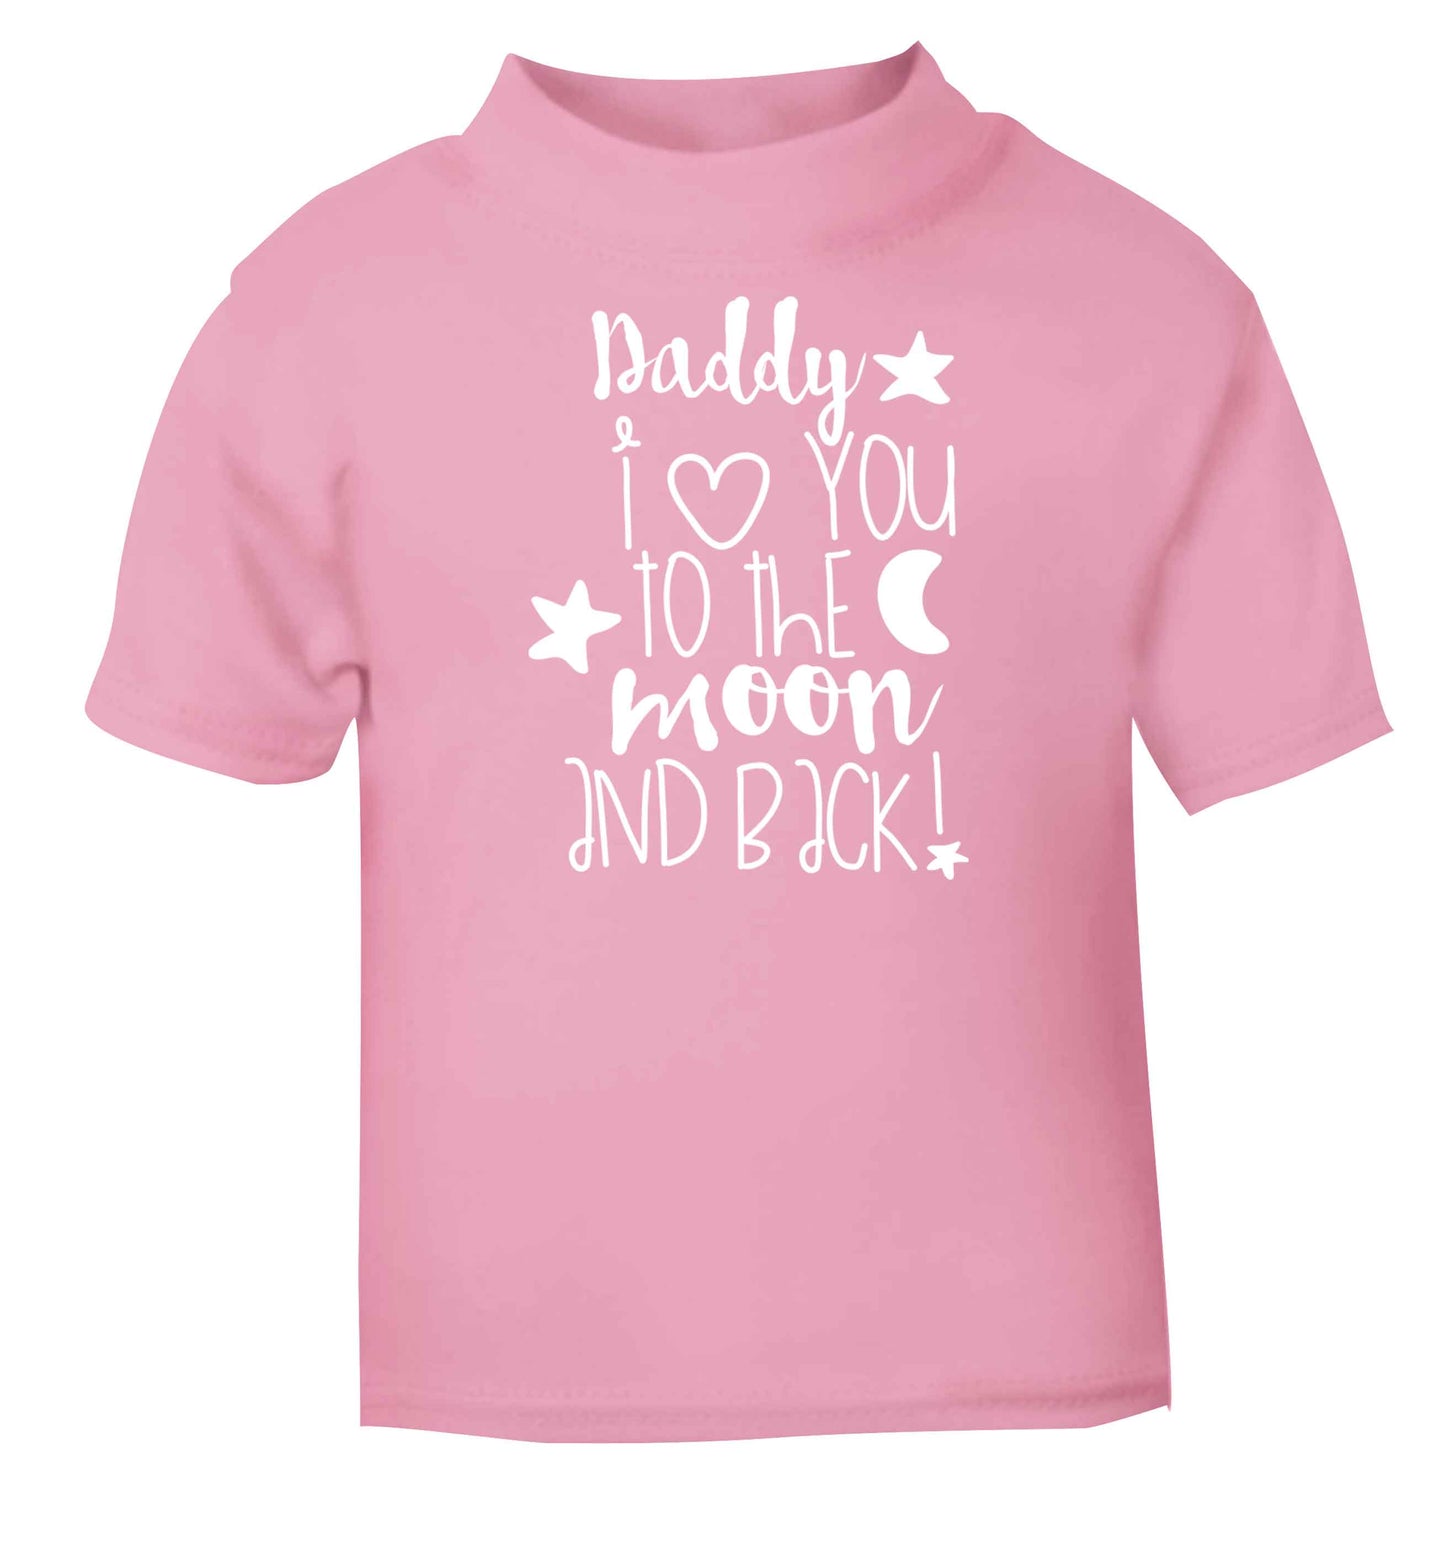 Daddy I love you to the moon and back light pink baby toddler Tshirt 2 Years